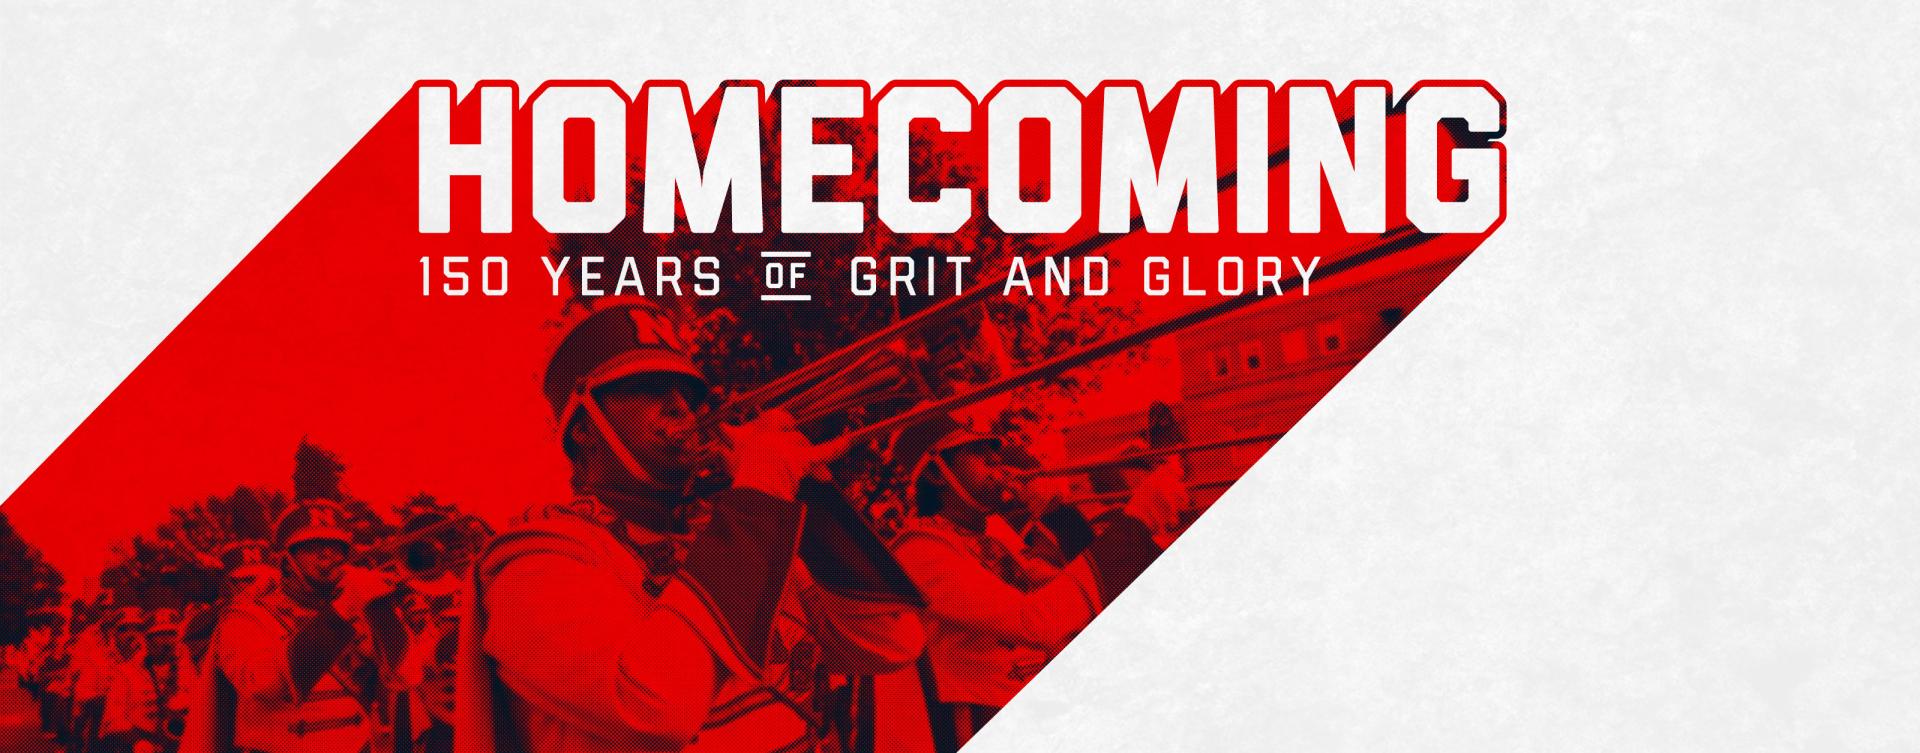 The homecoming parade will take place on Friday, October 4, at 6 p.m.